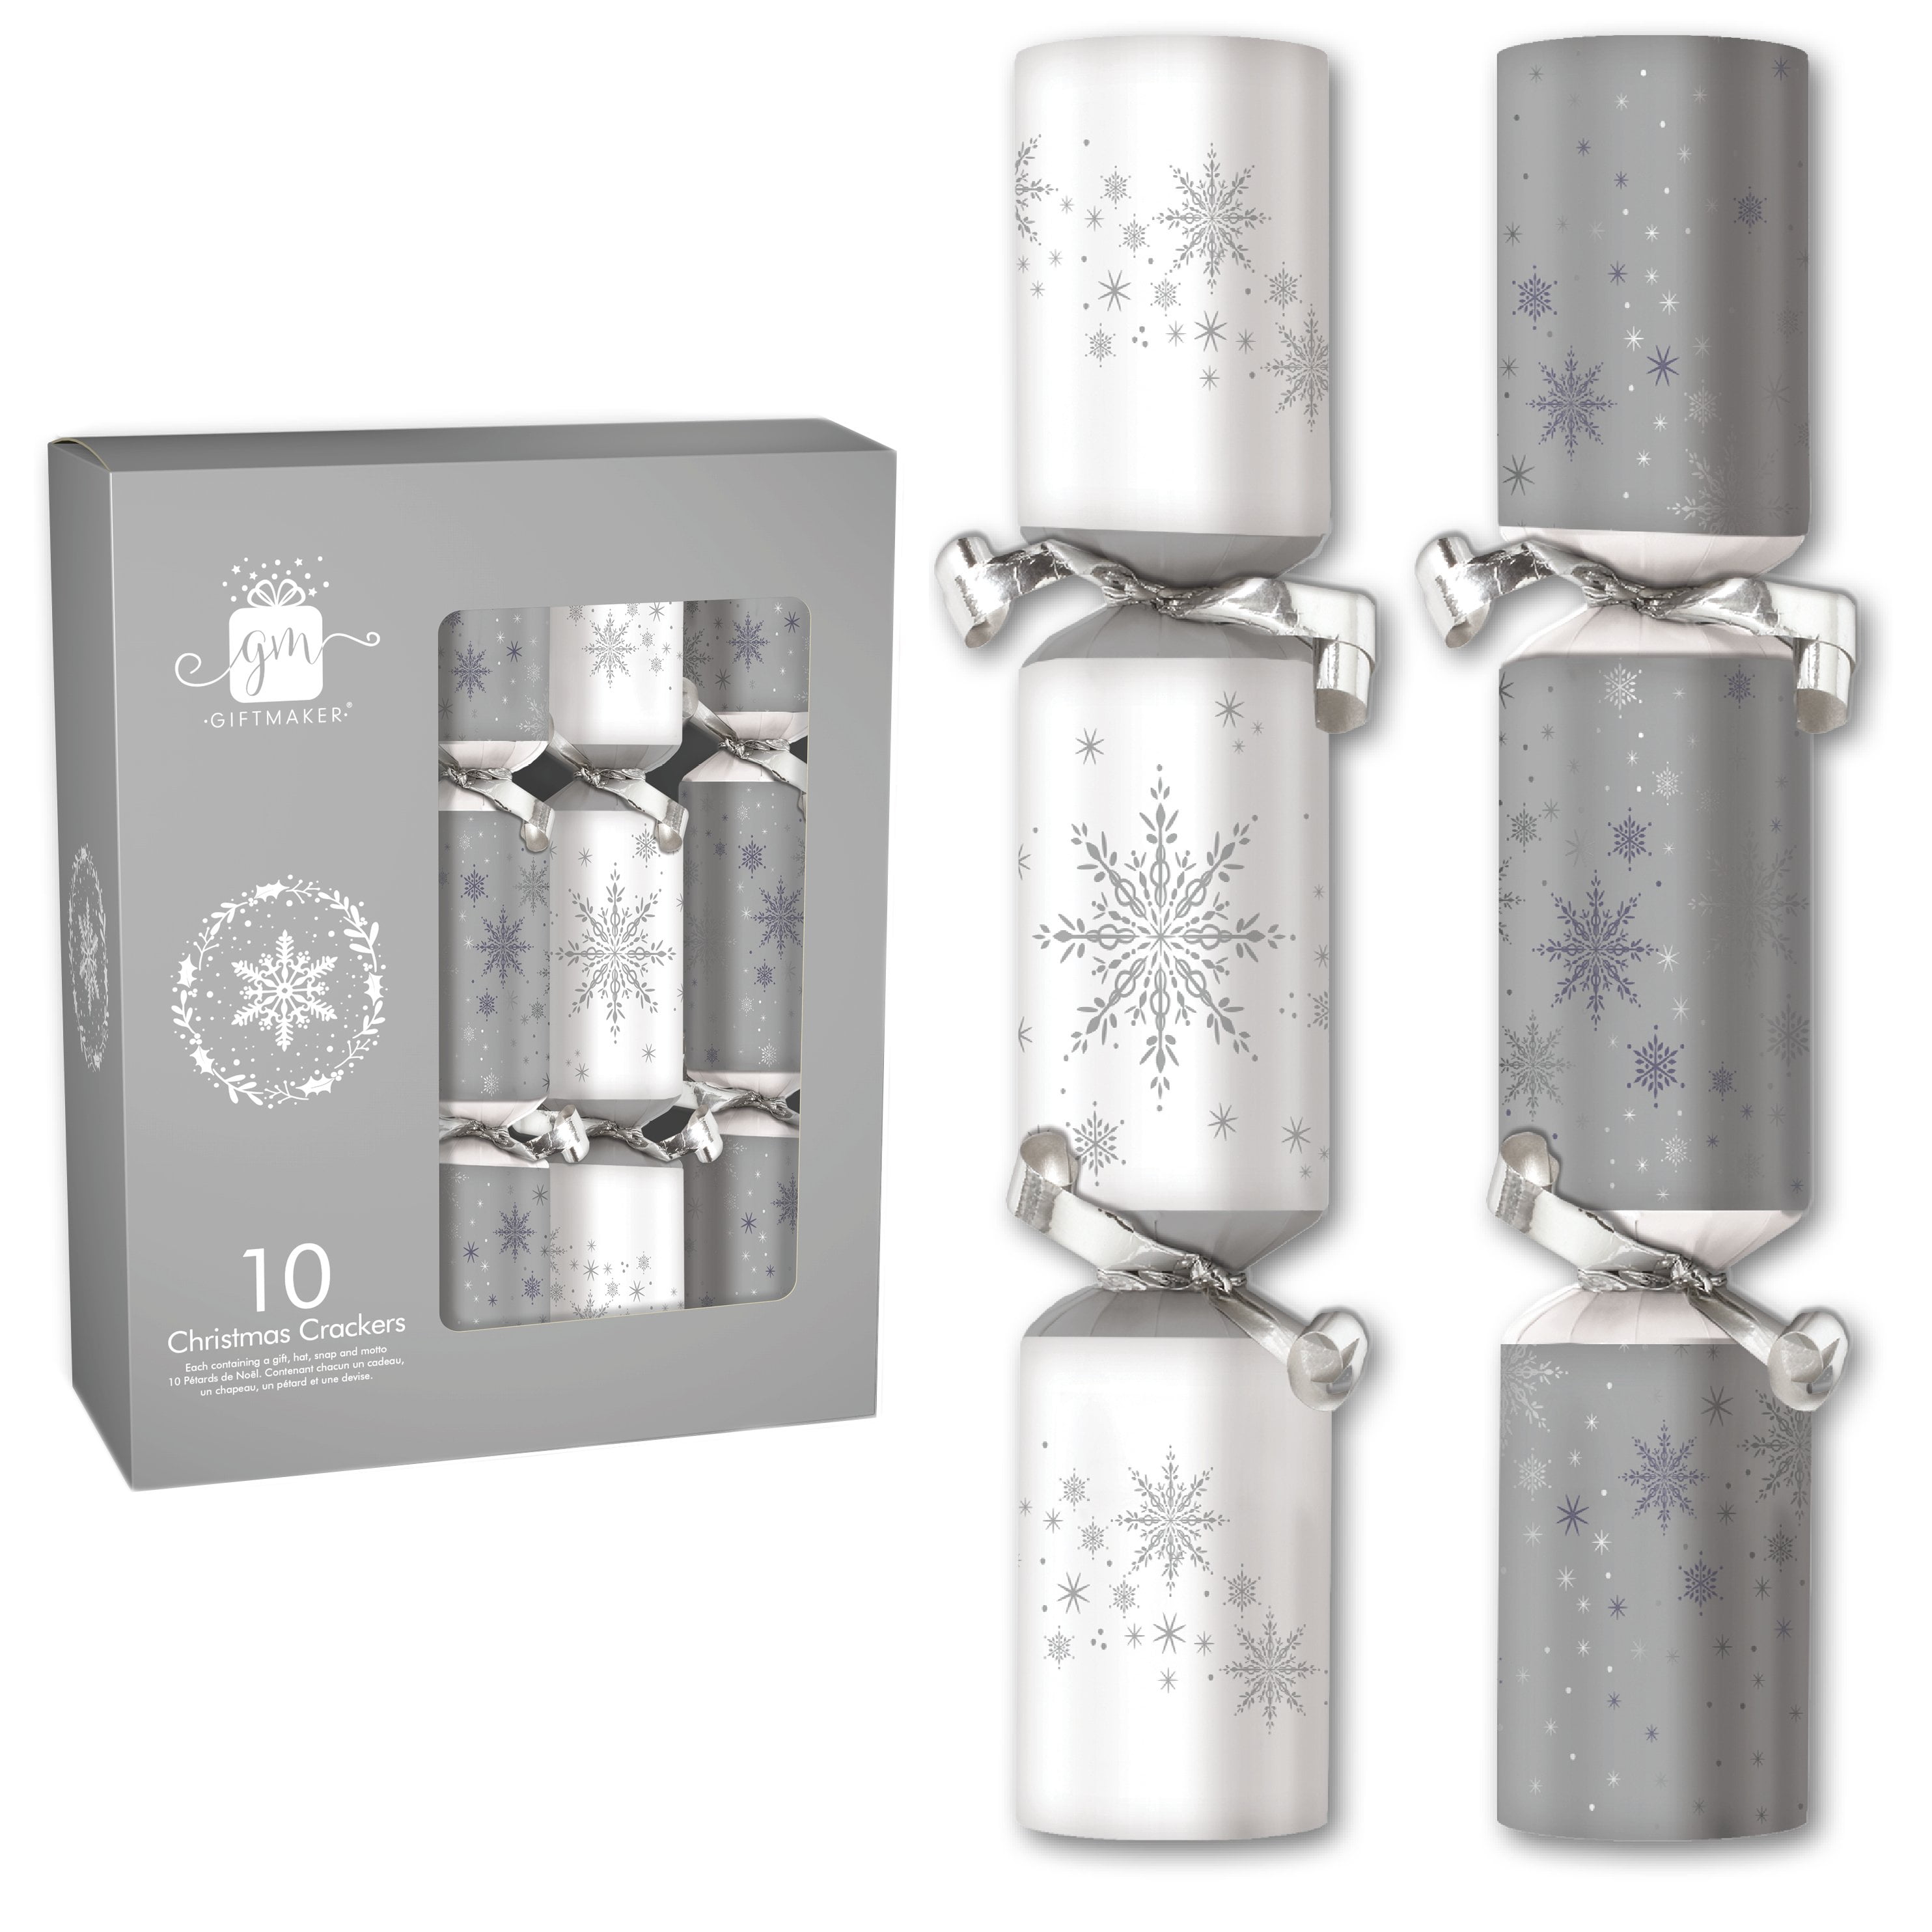 Box of 6 Christmas Crackers White and Silver Snowflakes 